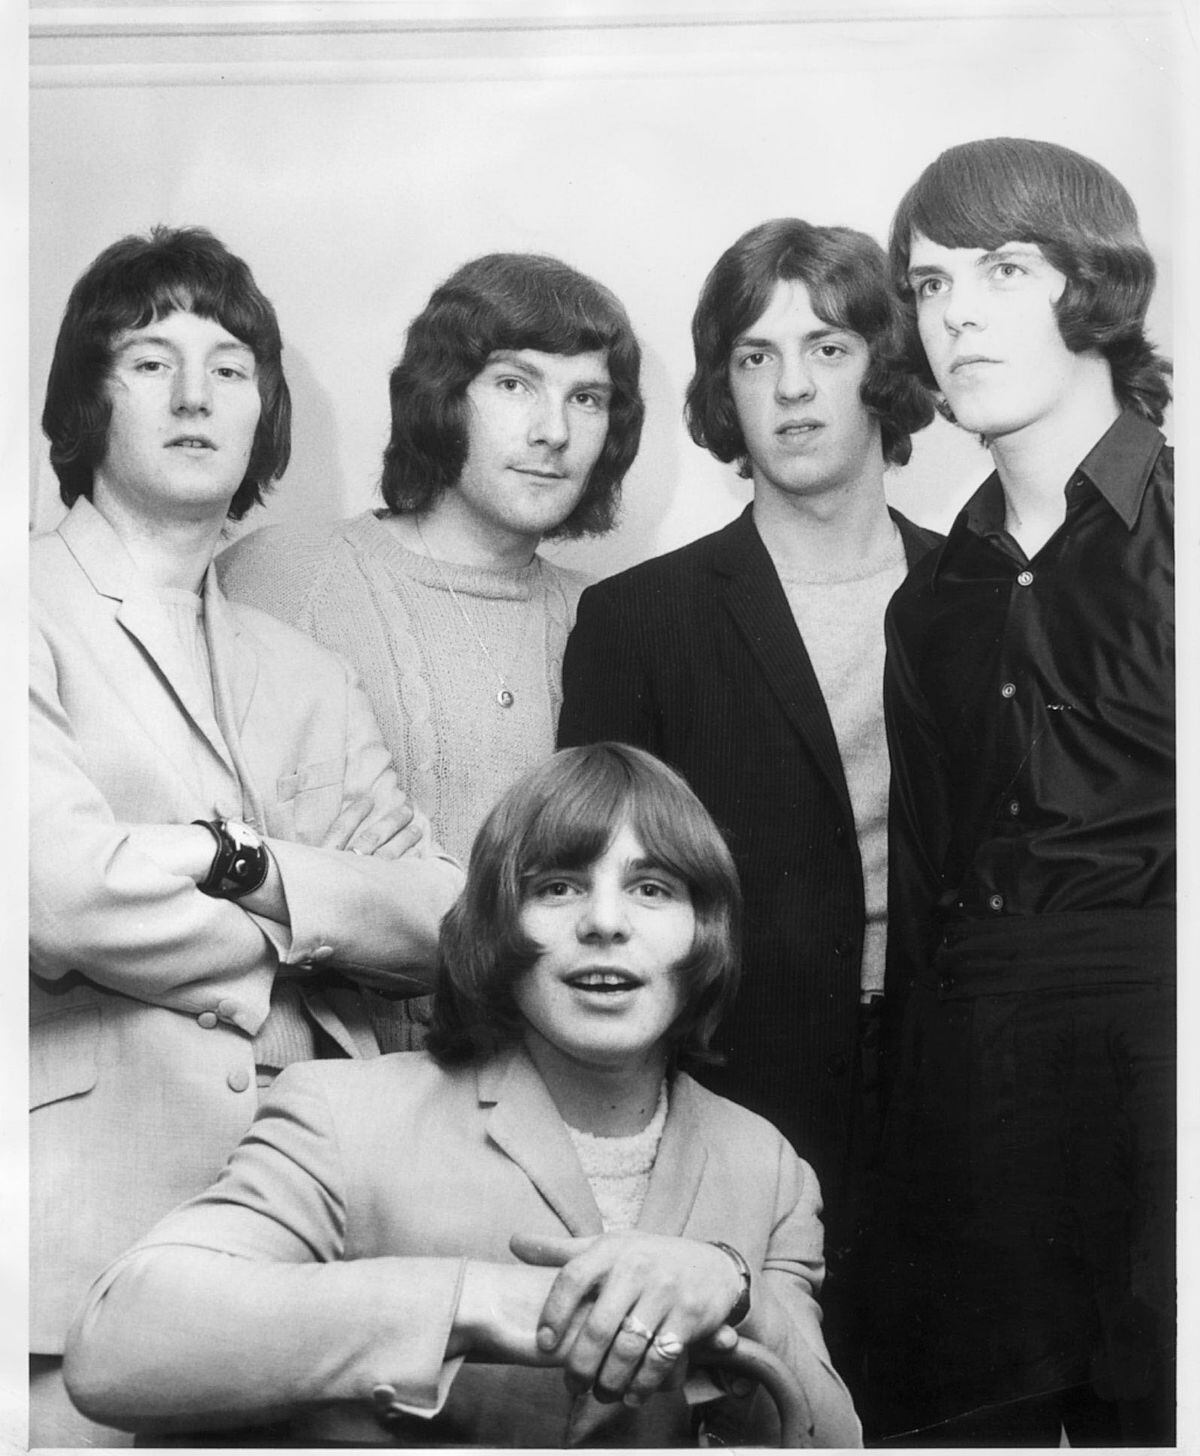 Fluff with, from back left, Mick Skinner, Chris Wallace, Alan Millington, Dave Archer and front, Gerry Ward.